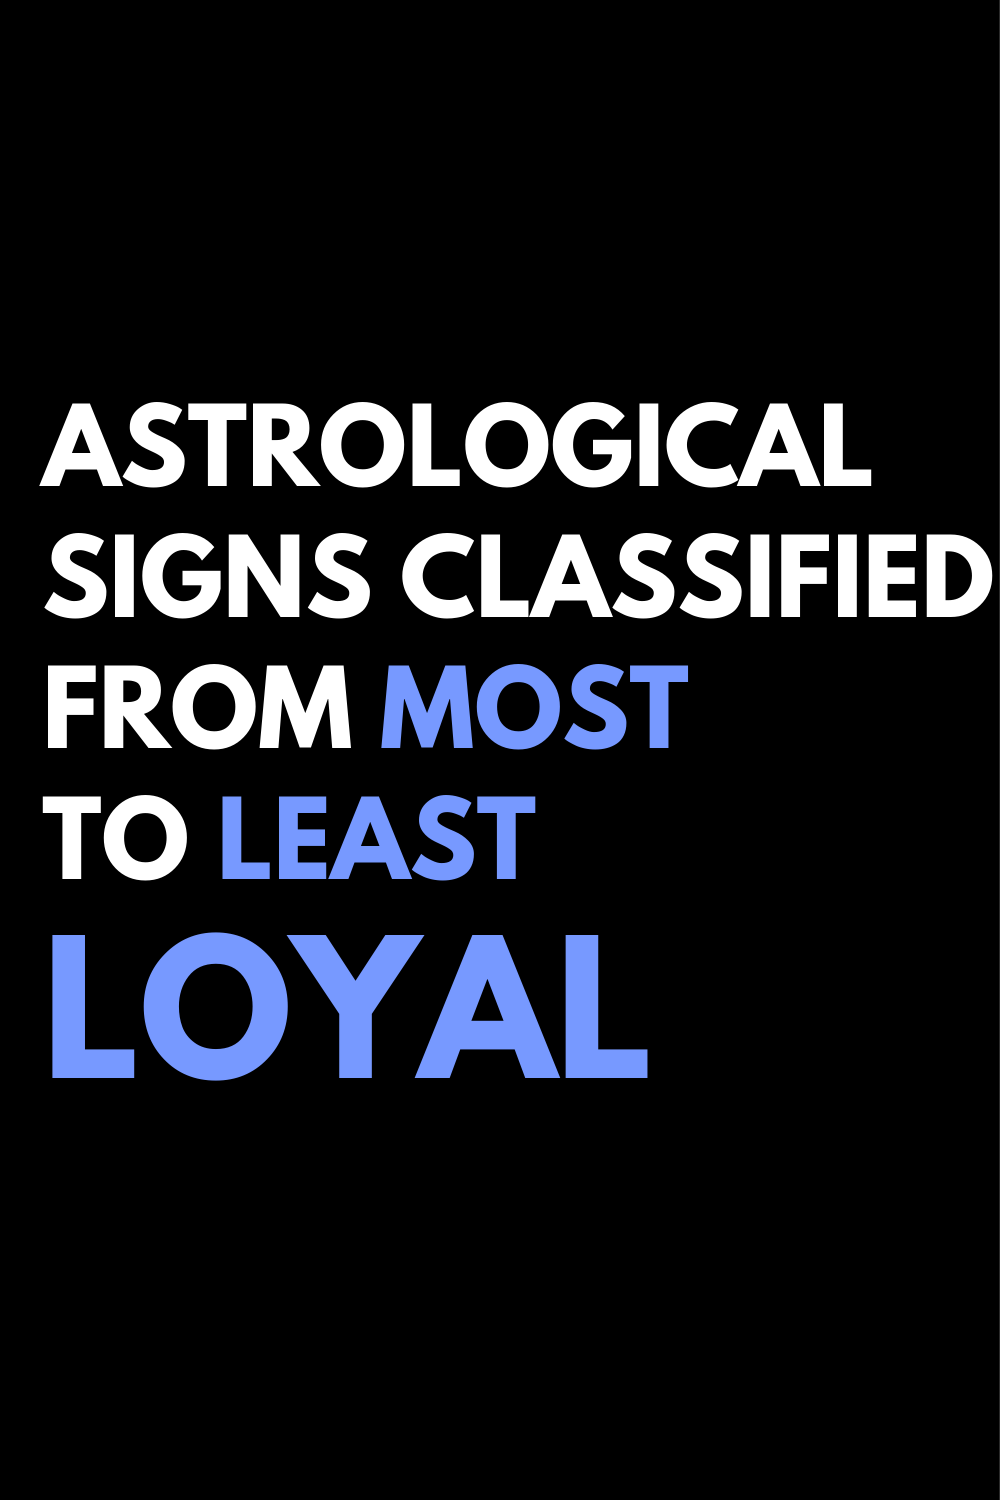 Astrological signs classified from most to least loyal